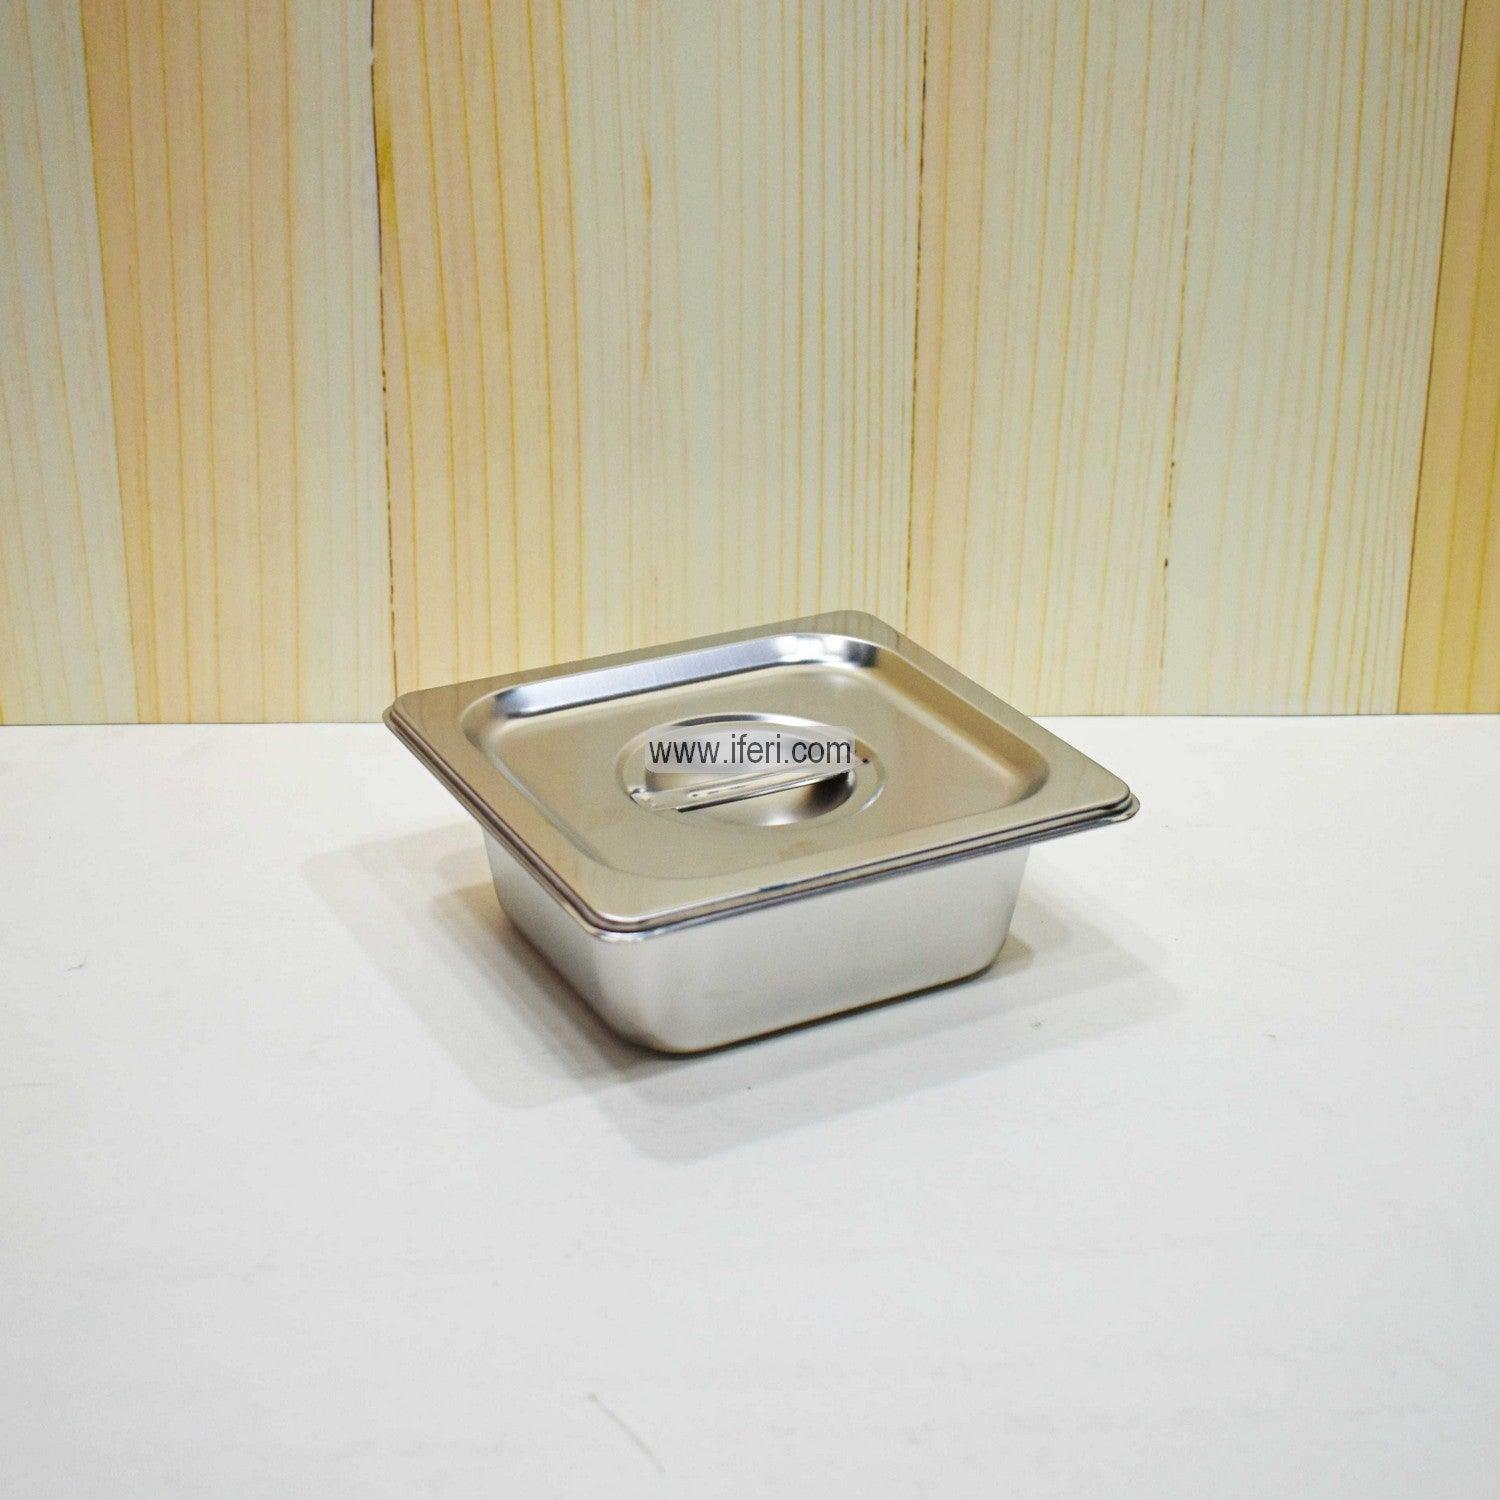 6.8 Inch Stainless Steel Food Pan with Lid SN0610 Price in Bangladesh - iferi.com